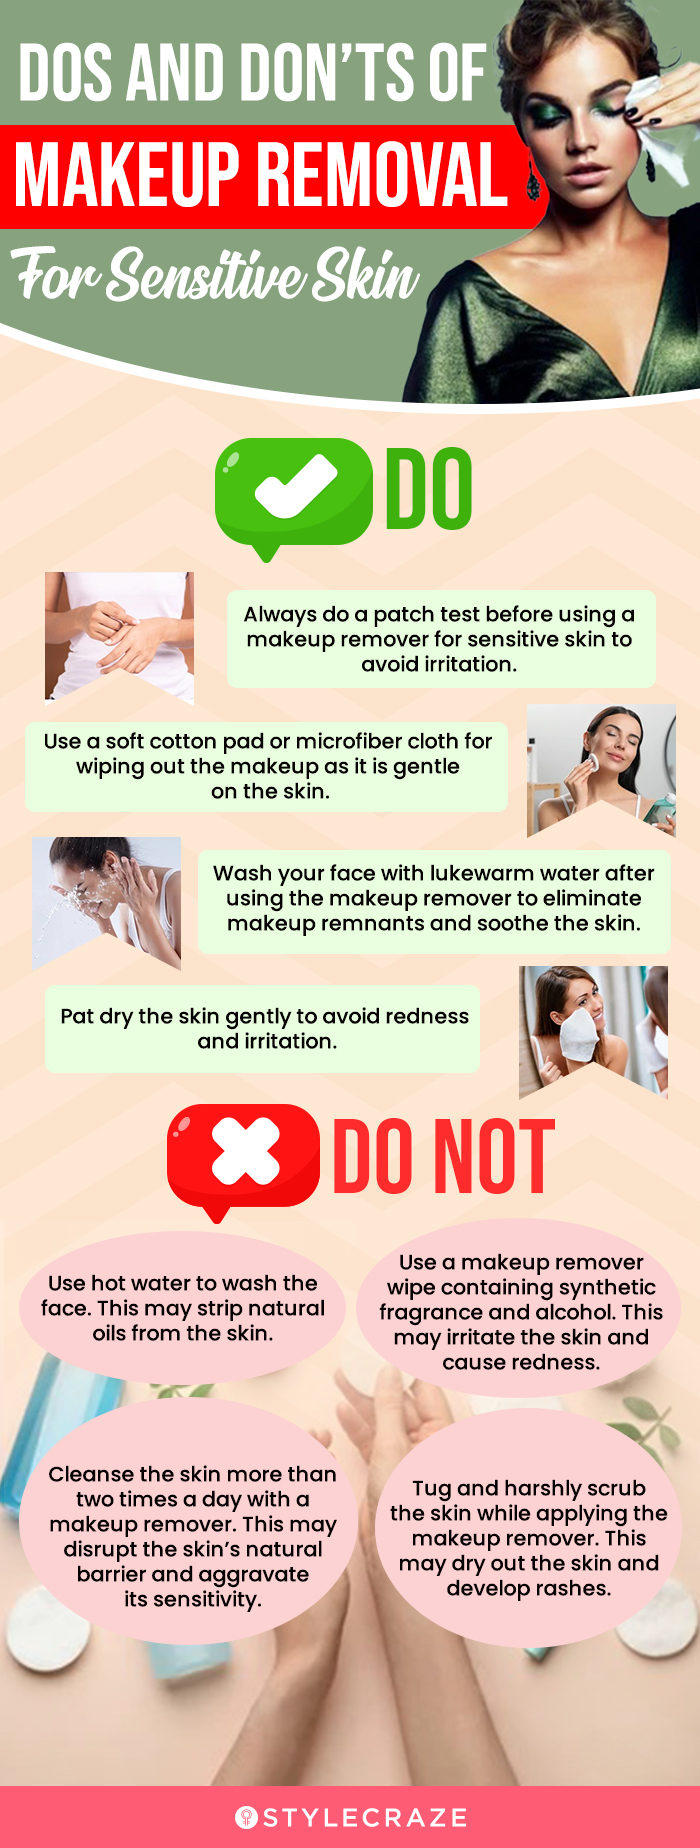  Dos And Don’ts Of Makeup Removal For Sensitive Skin (infographic)